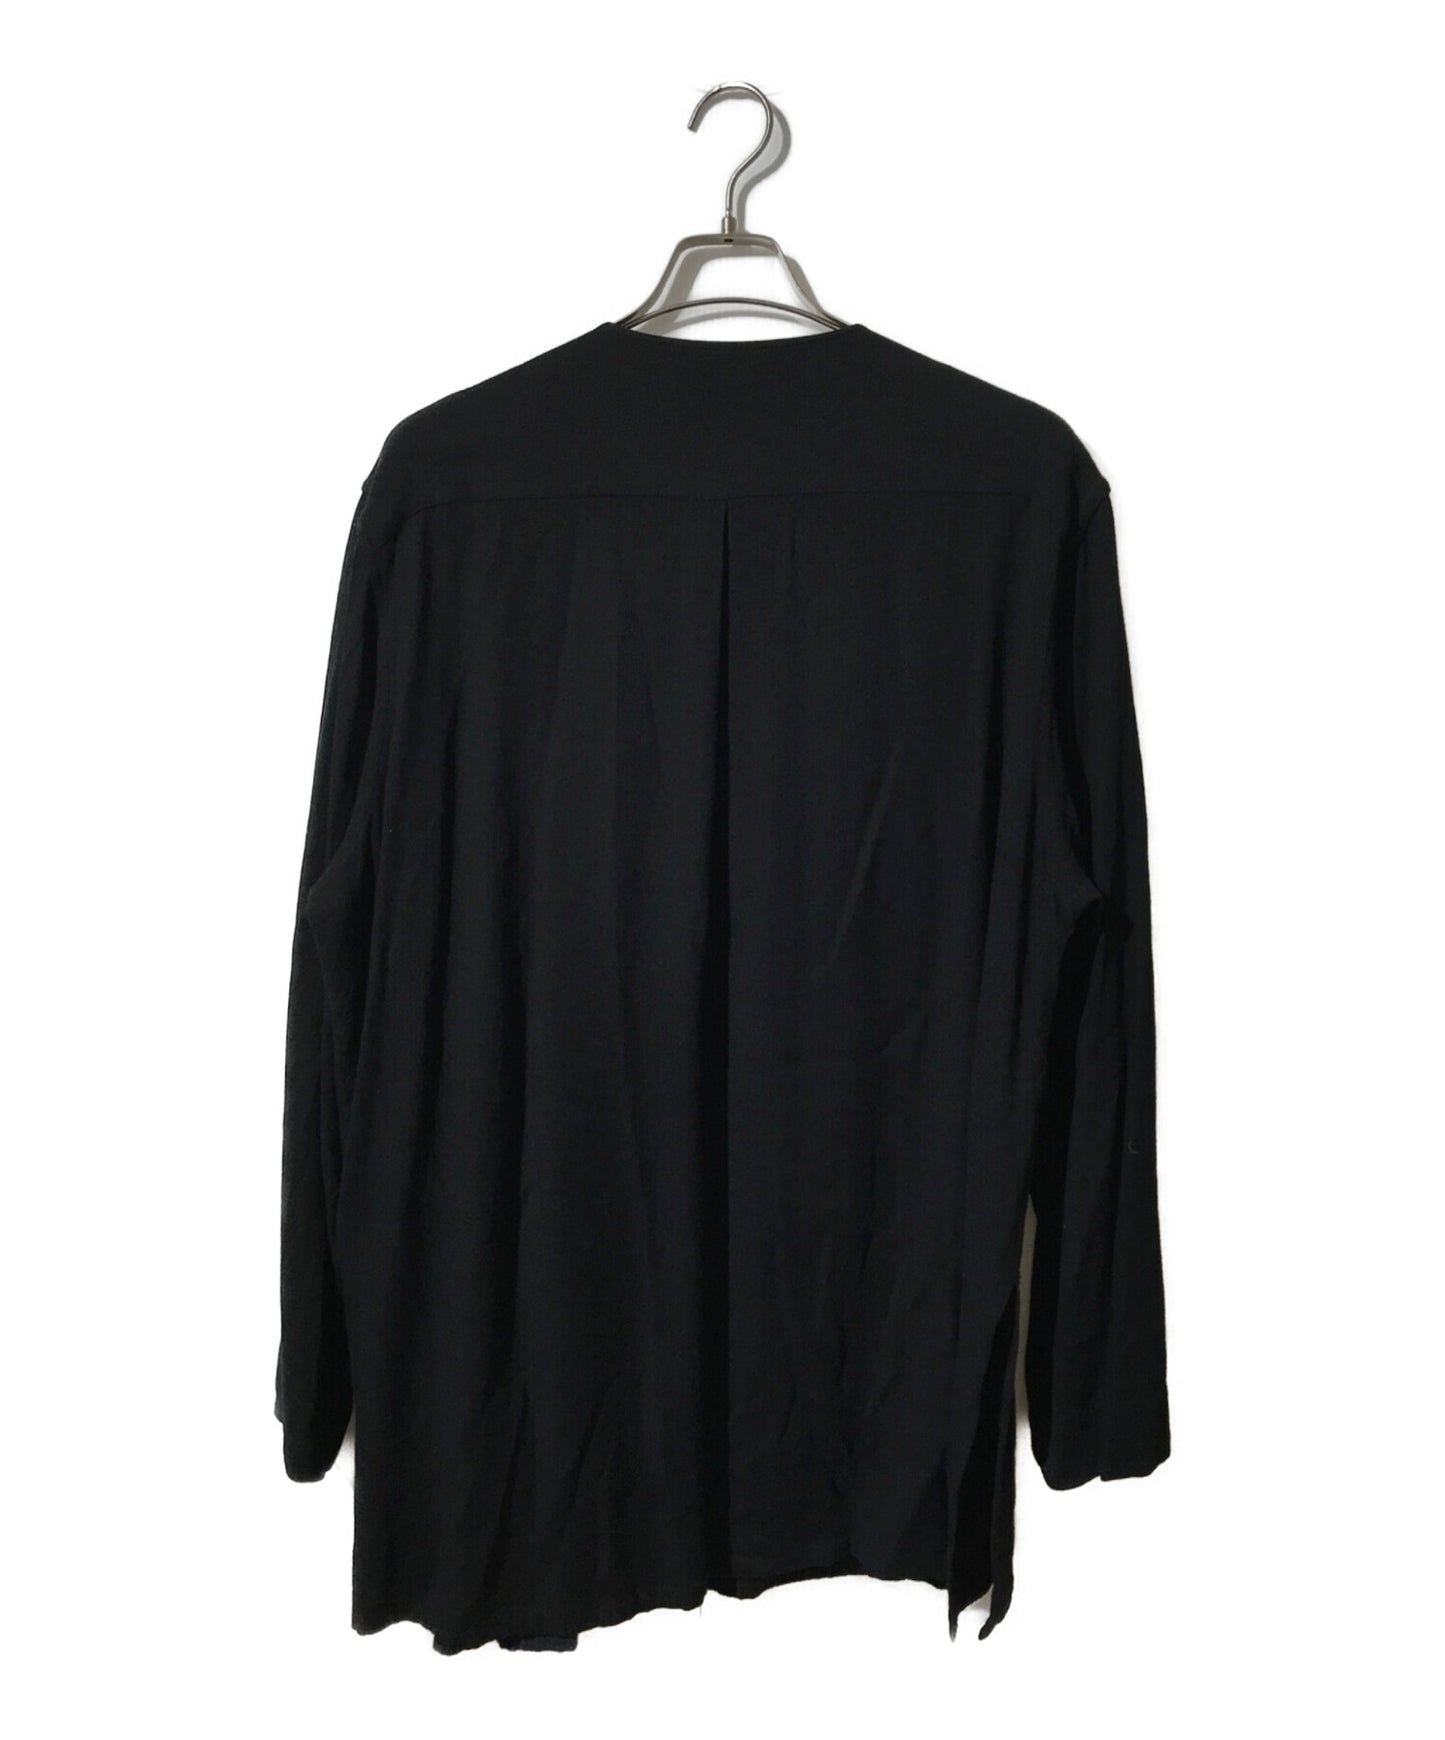 [Pre-owned] Yohji Yamamoto pour homme Assymetrical Layered Switched Shirt HD-B25-808